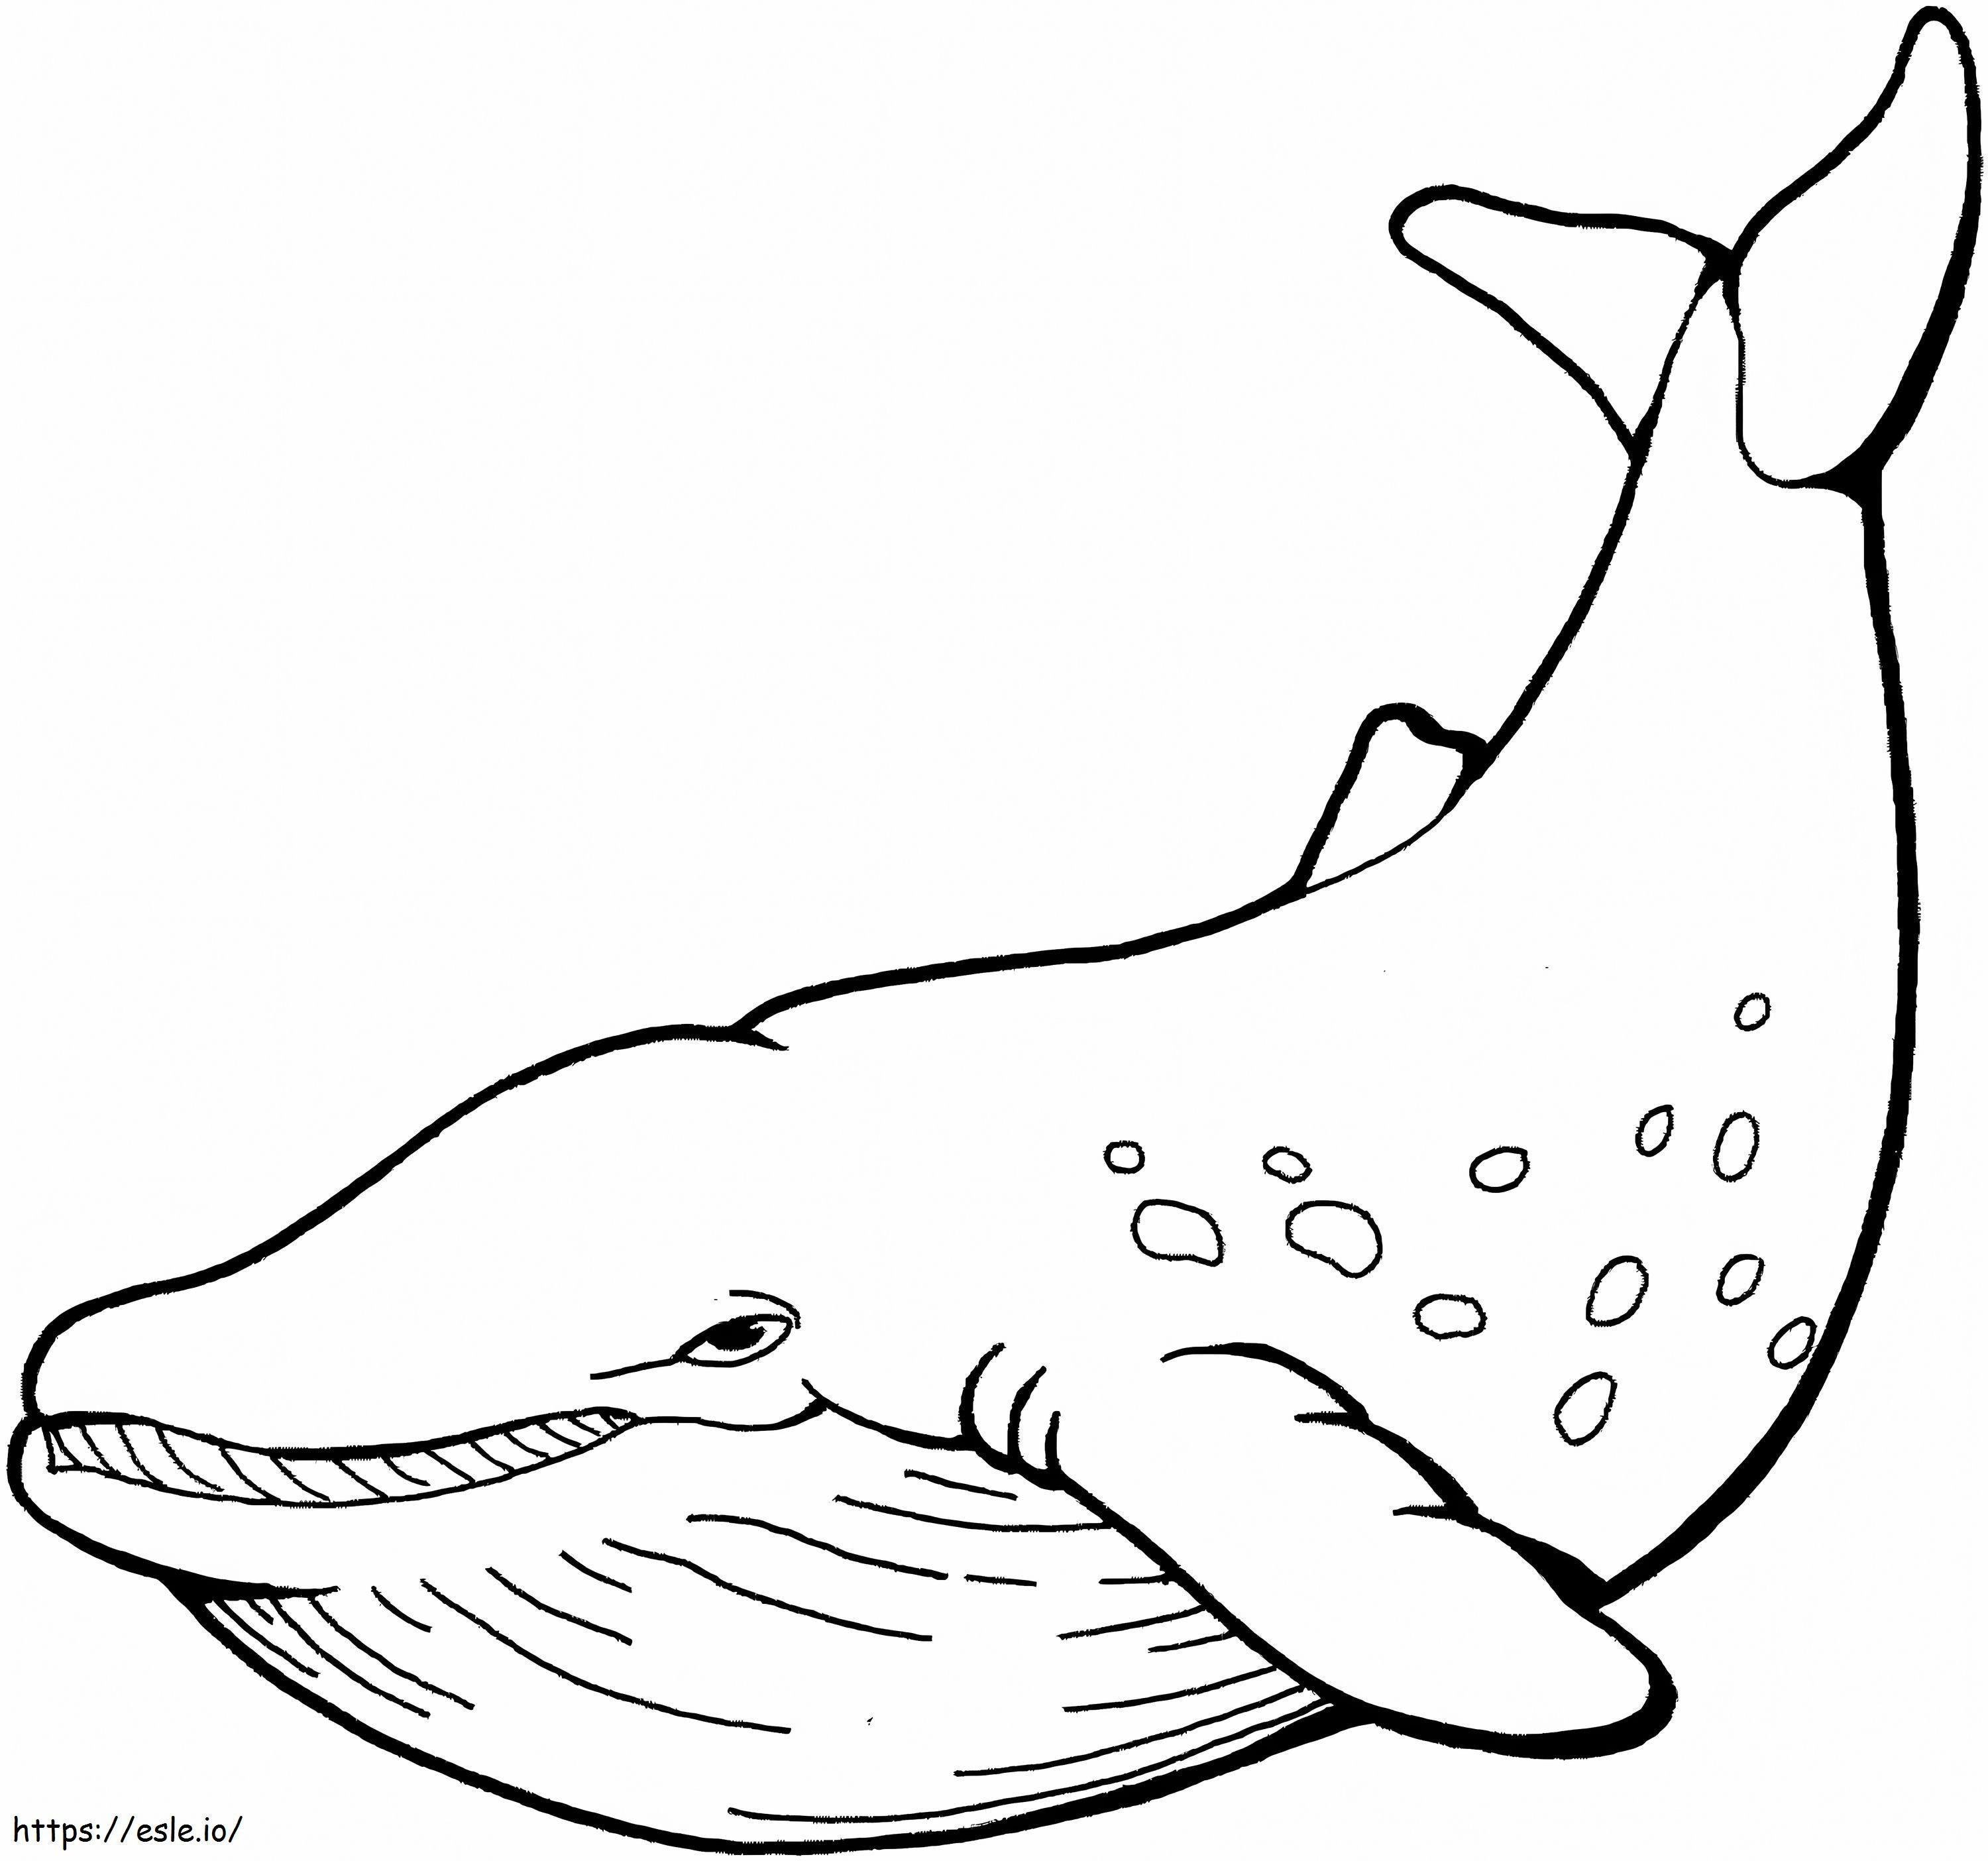 Simple Whale coloring page